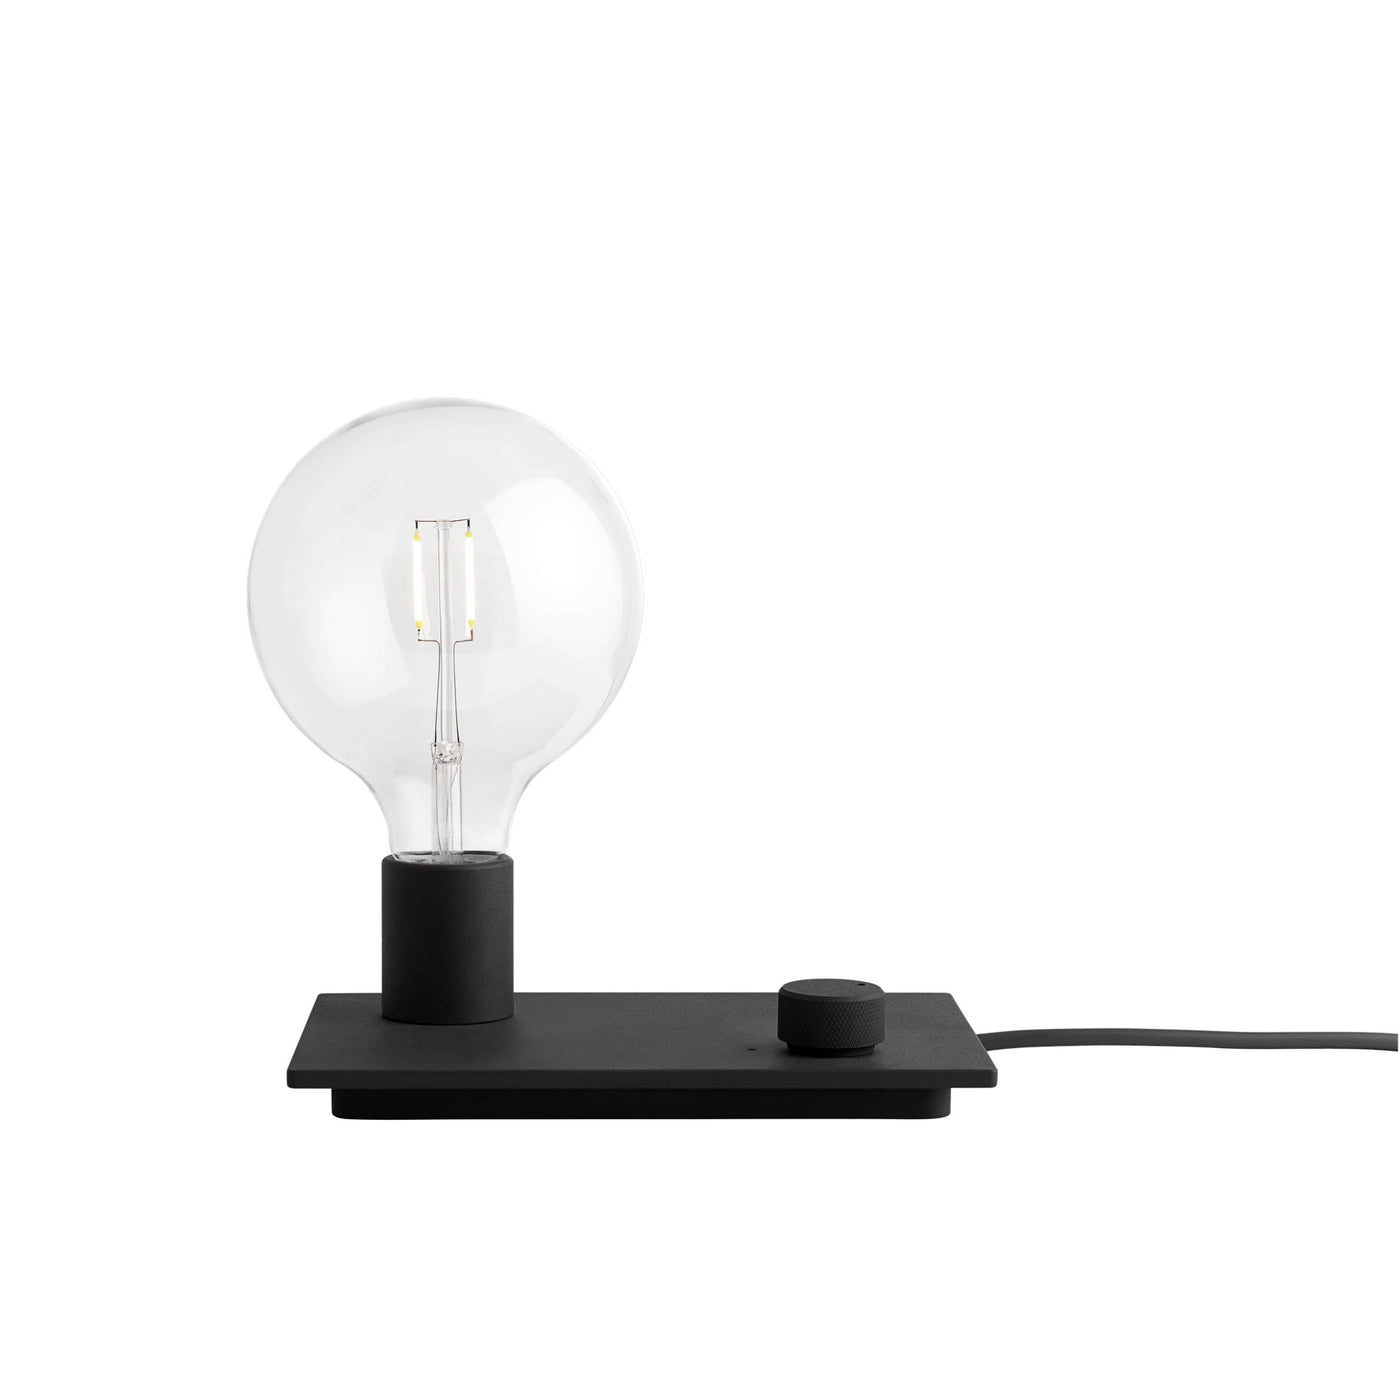 Muuto control lamp black available at someday designs. #colour_black